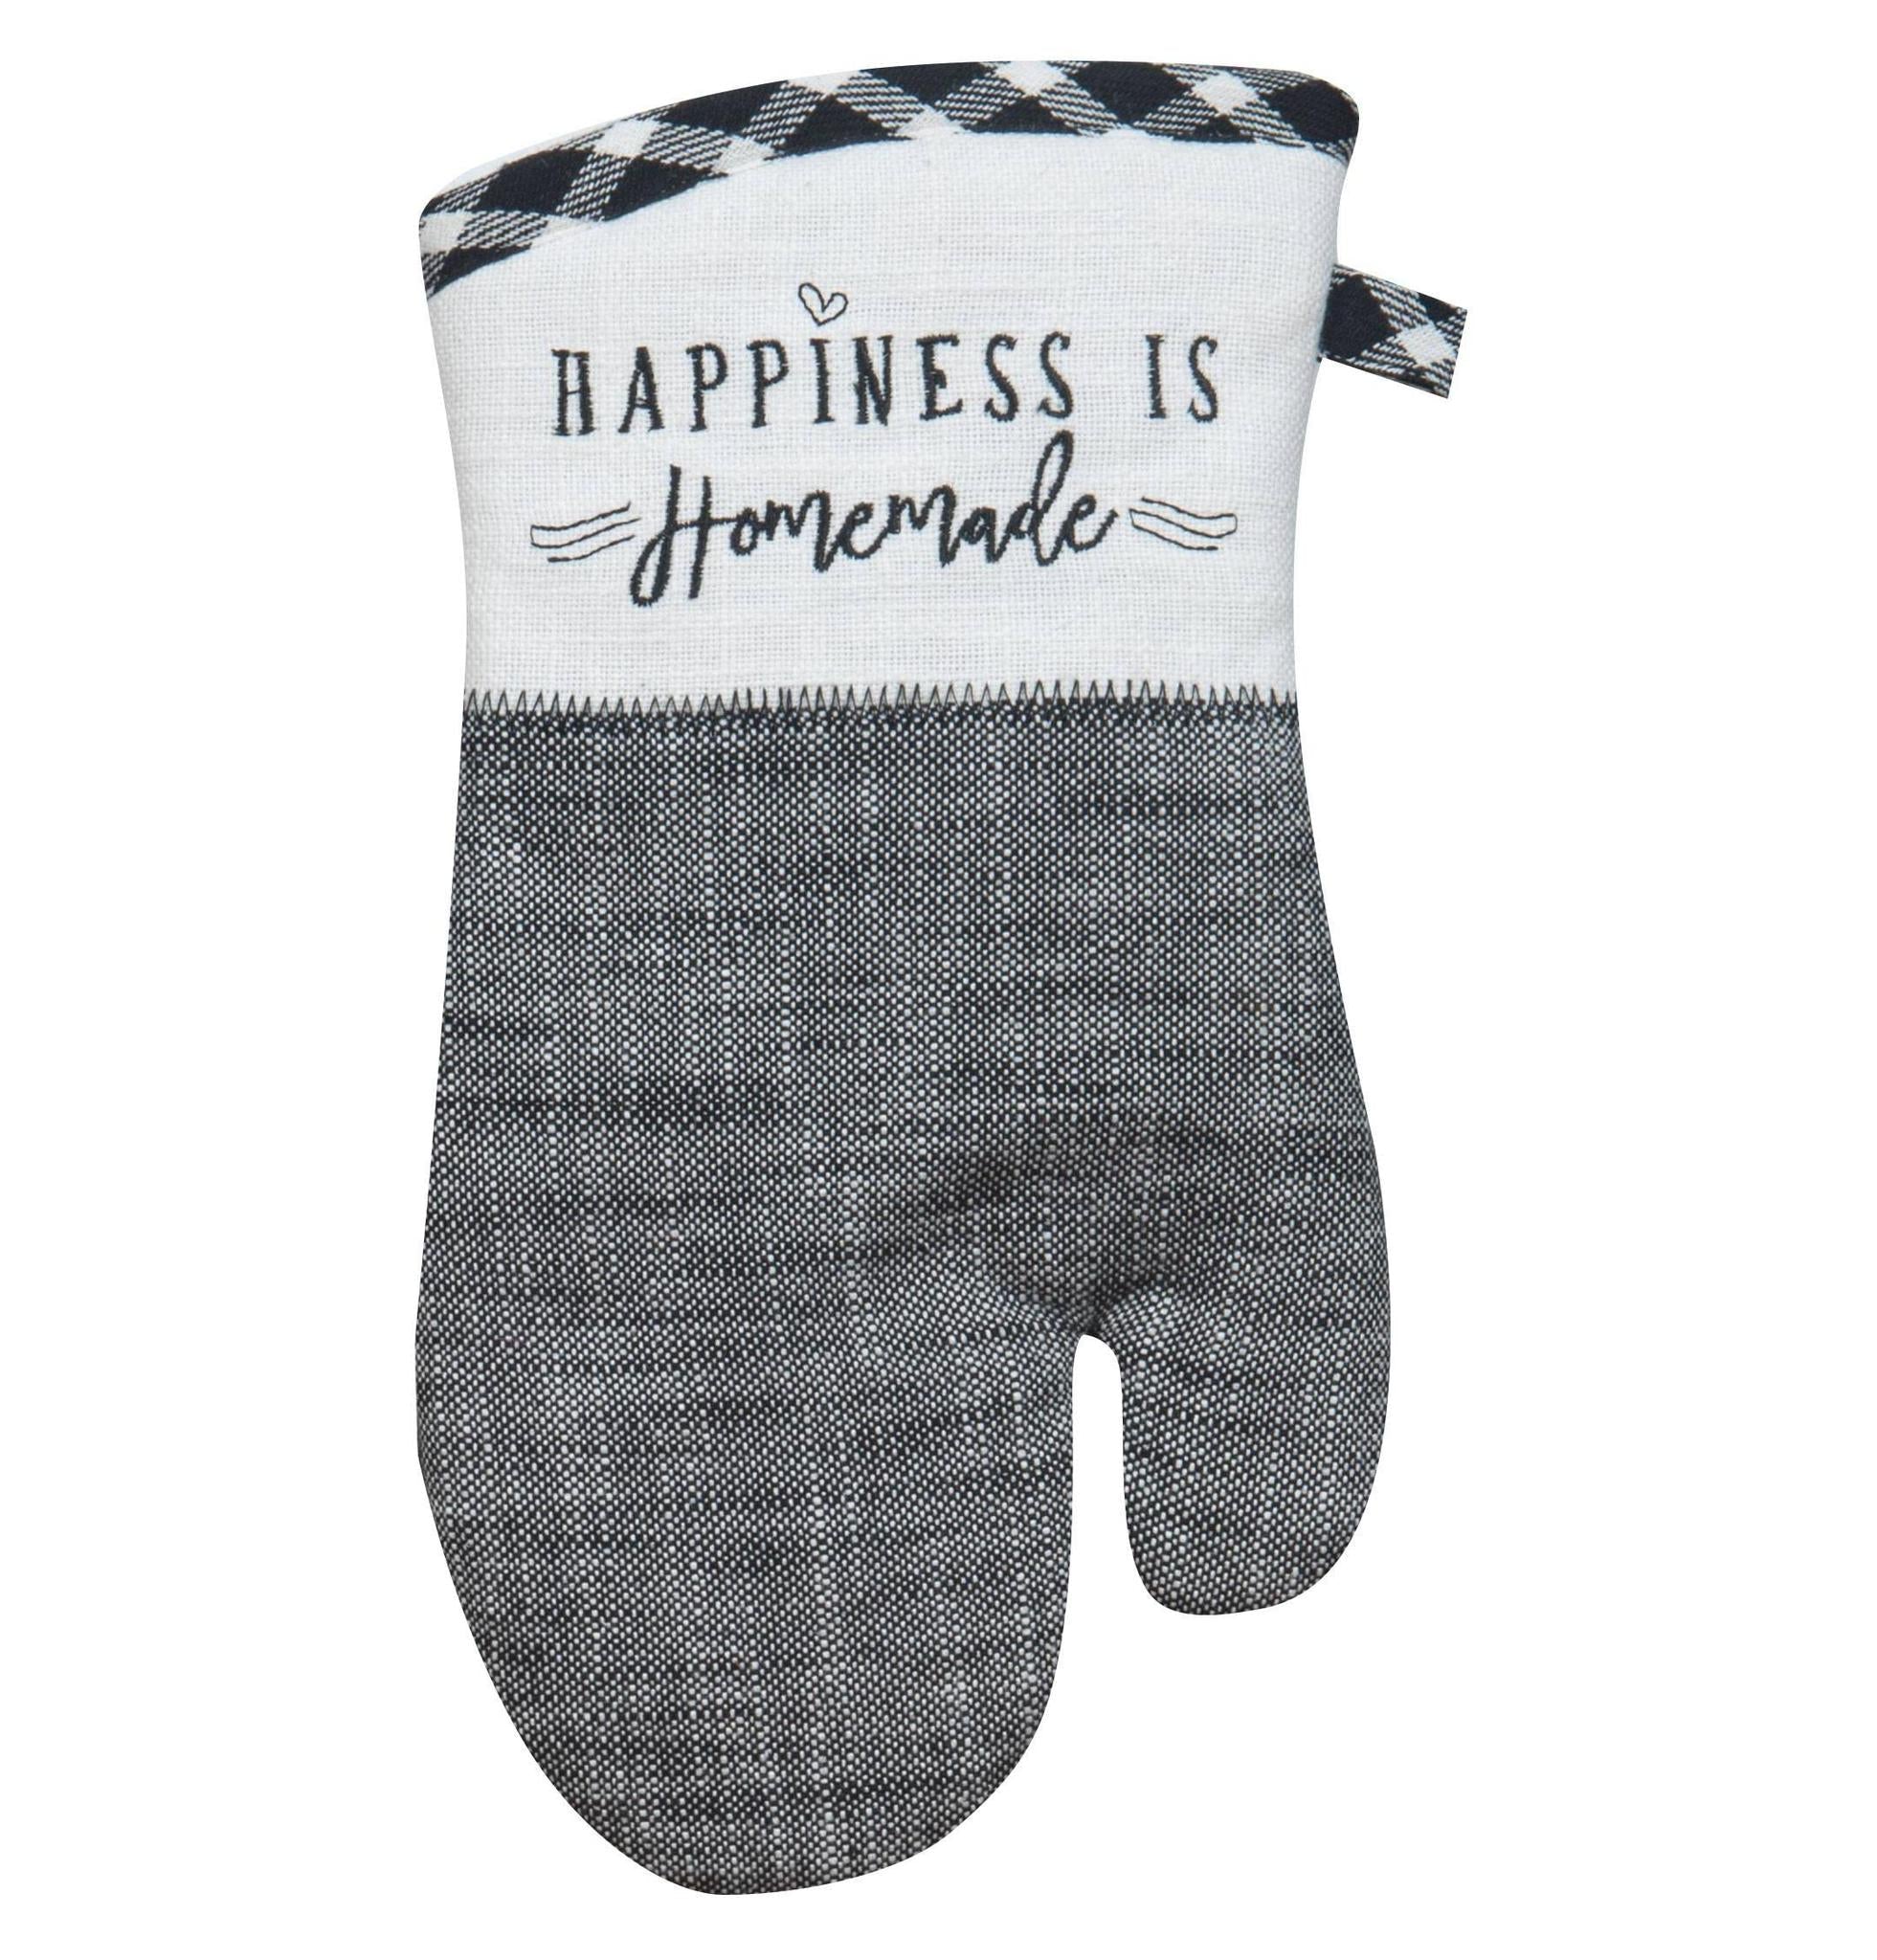 Embroidered Oven Mitt | Happiness is Homemade